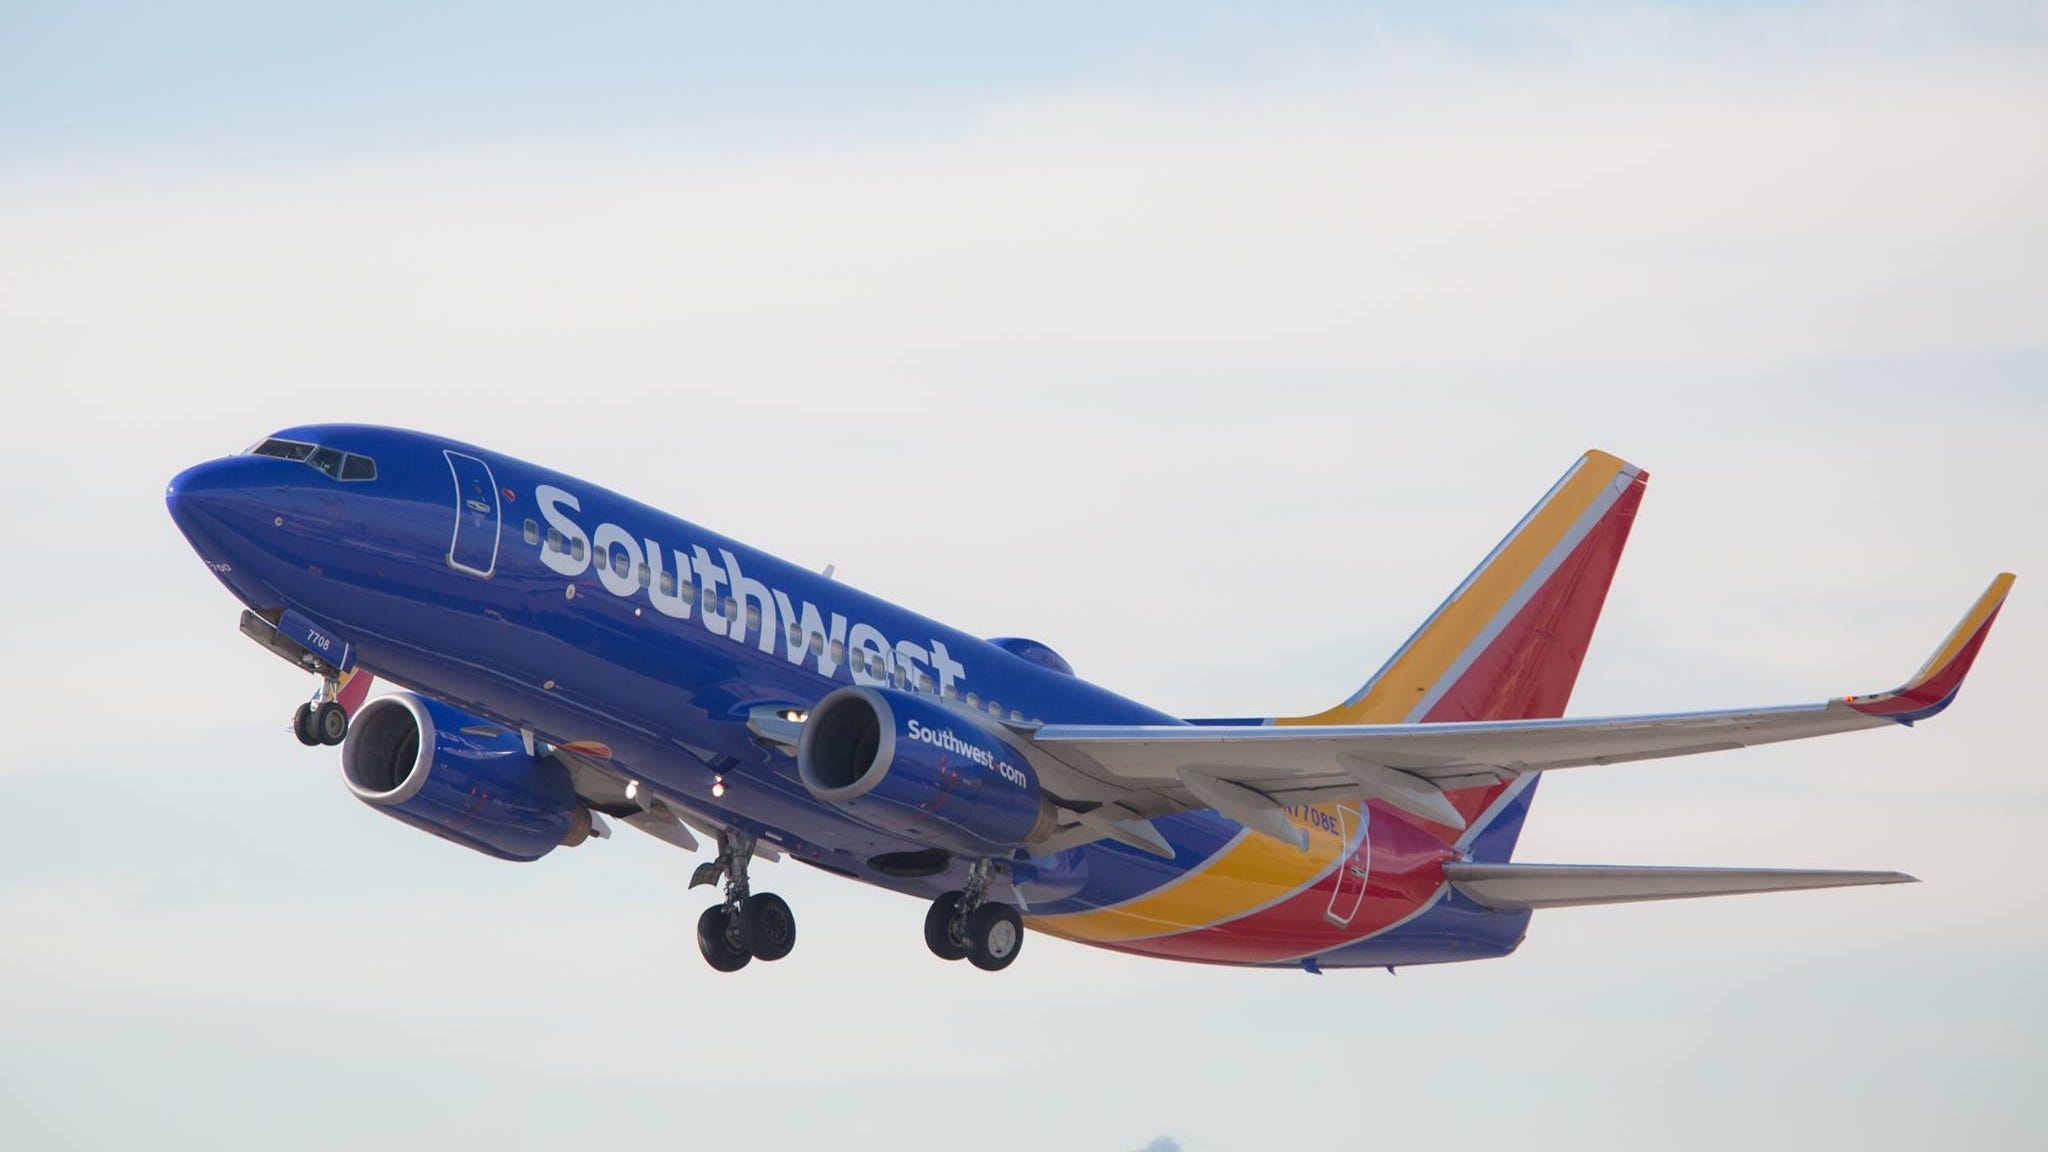 A California woman punched a Southwest flight attendant. Now, she faces 15 months in prison